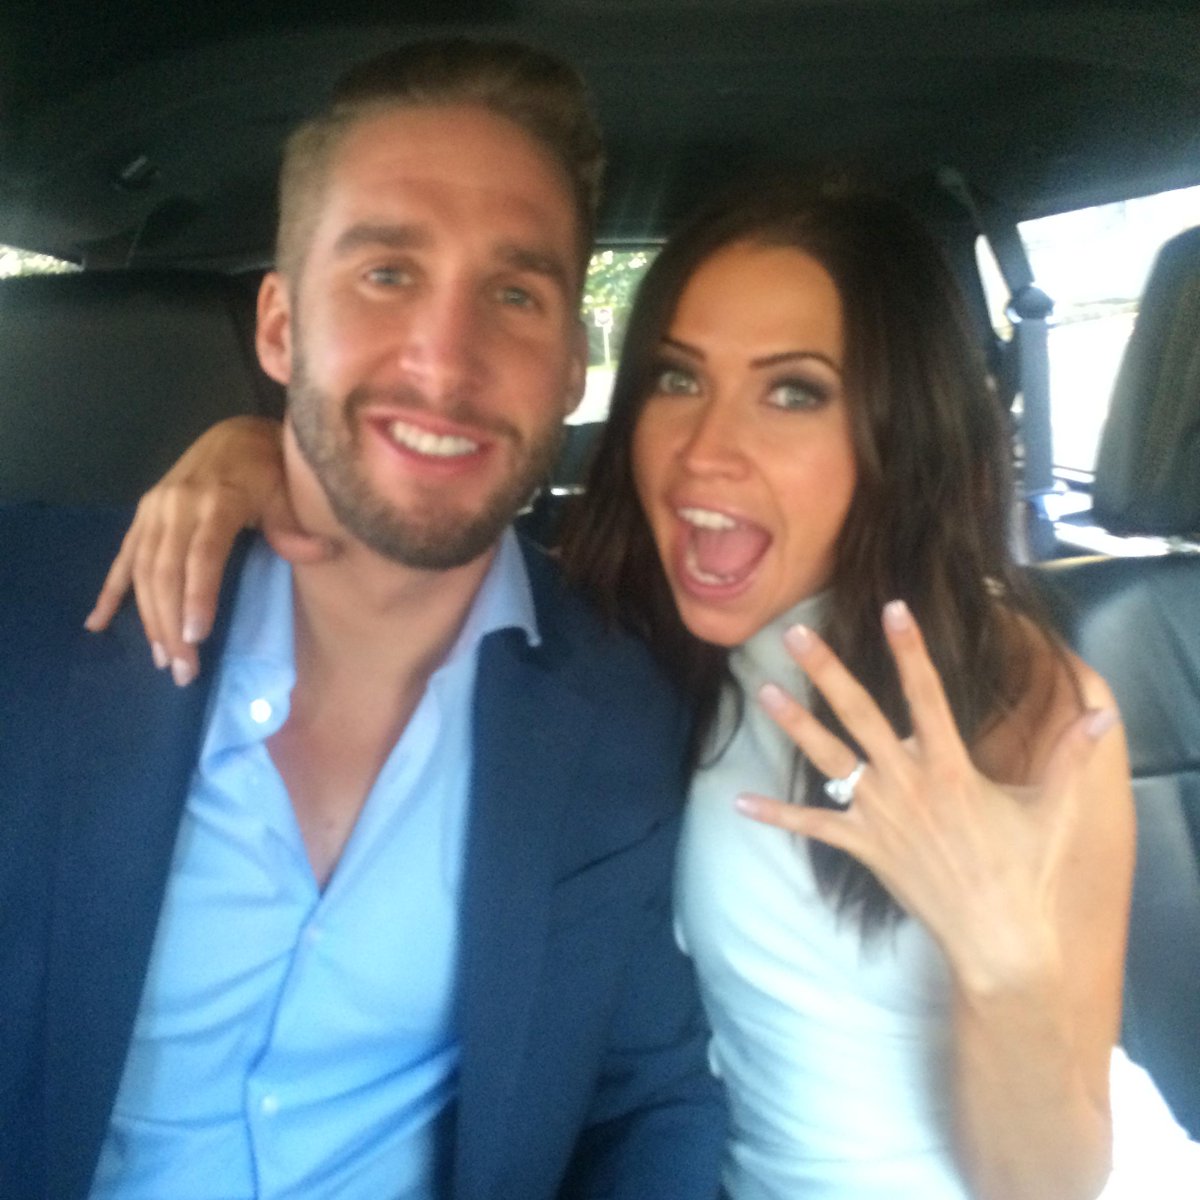 makeupartist - Kaitlyn Bristowe - Shawn Booth - Fan Forum - General Discussion  - Page 58 CK_3fRvWEAA6YGF